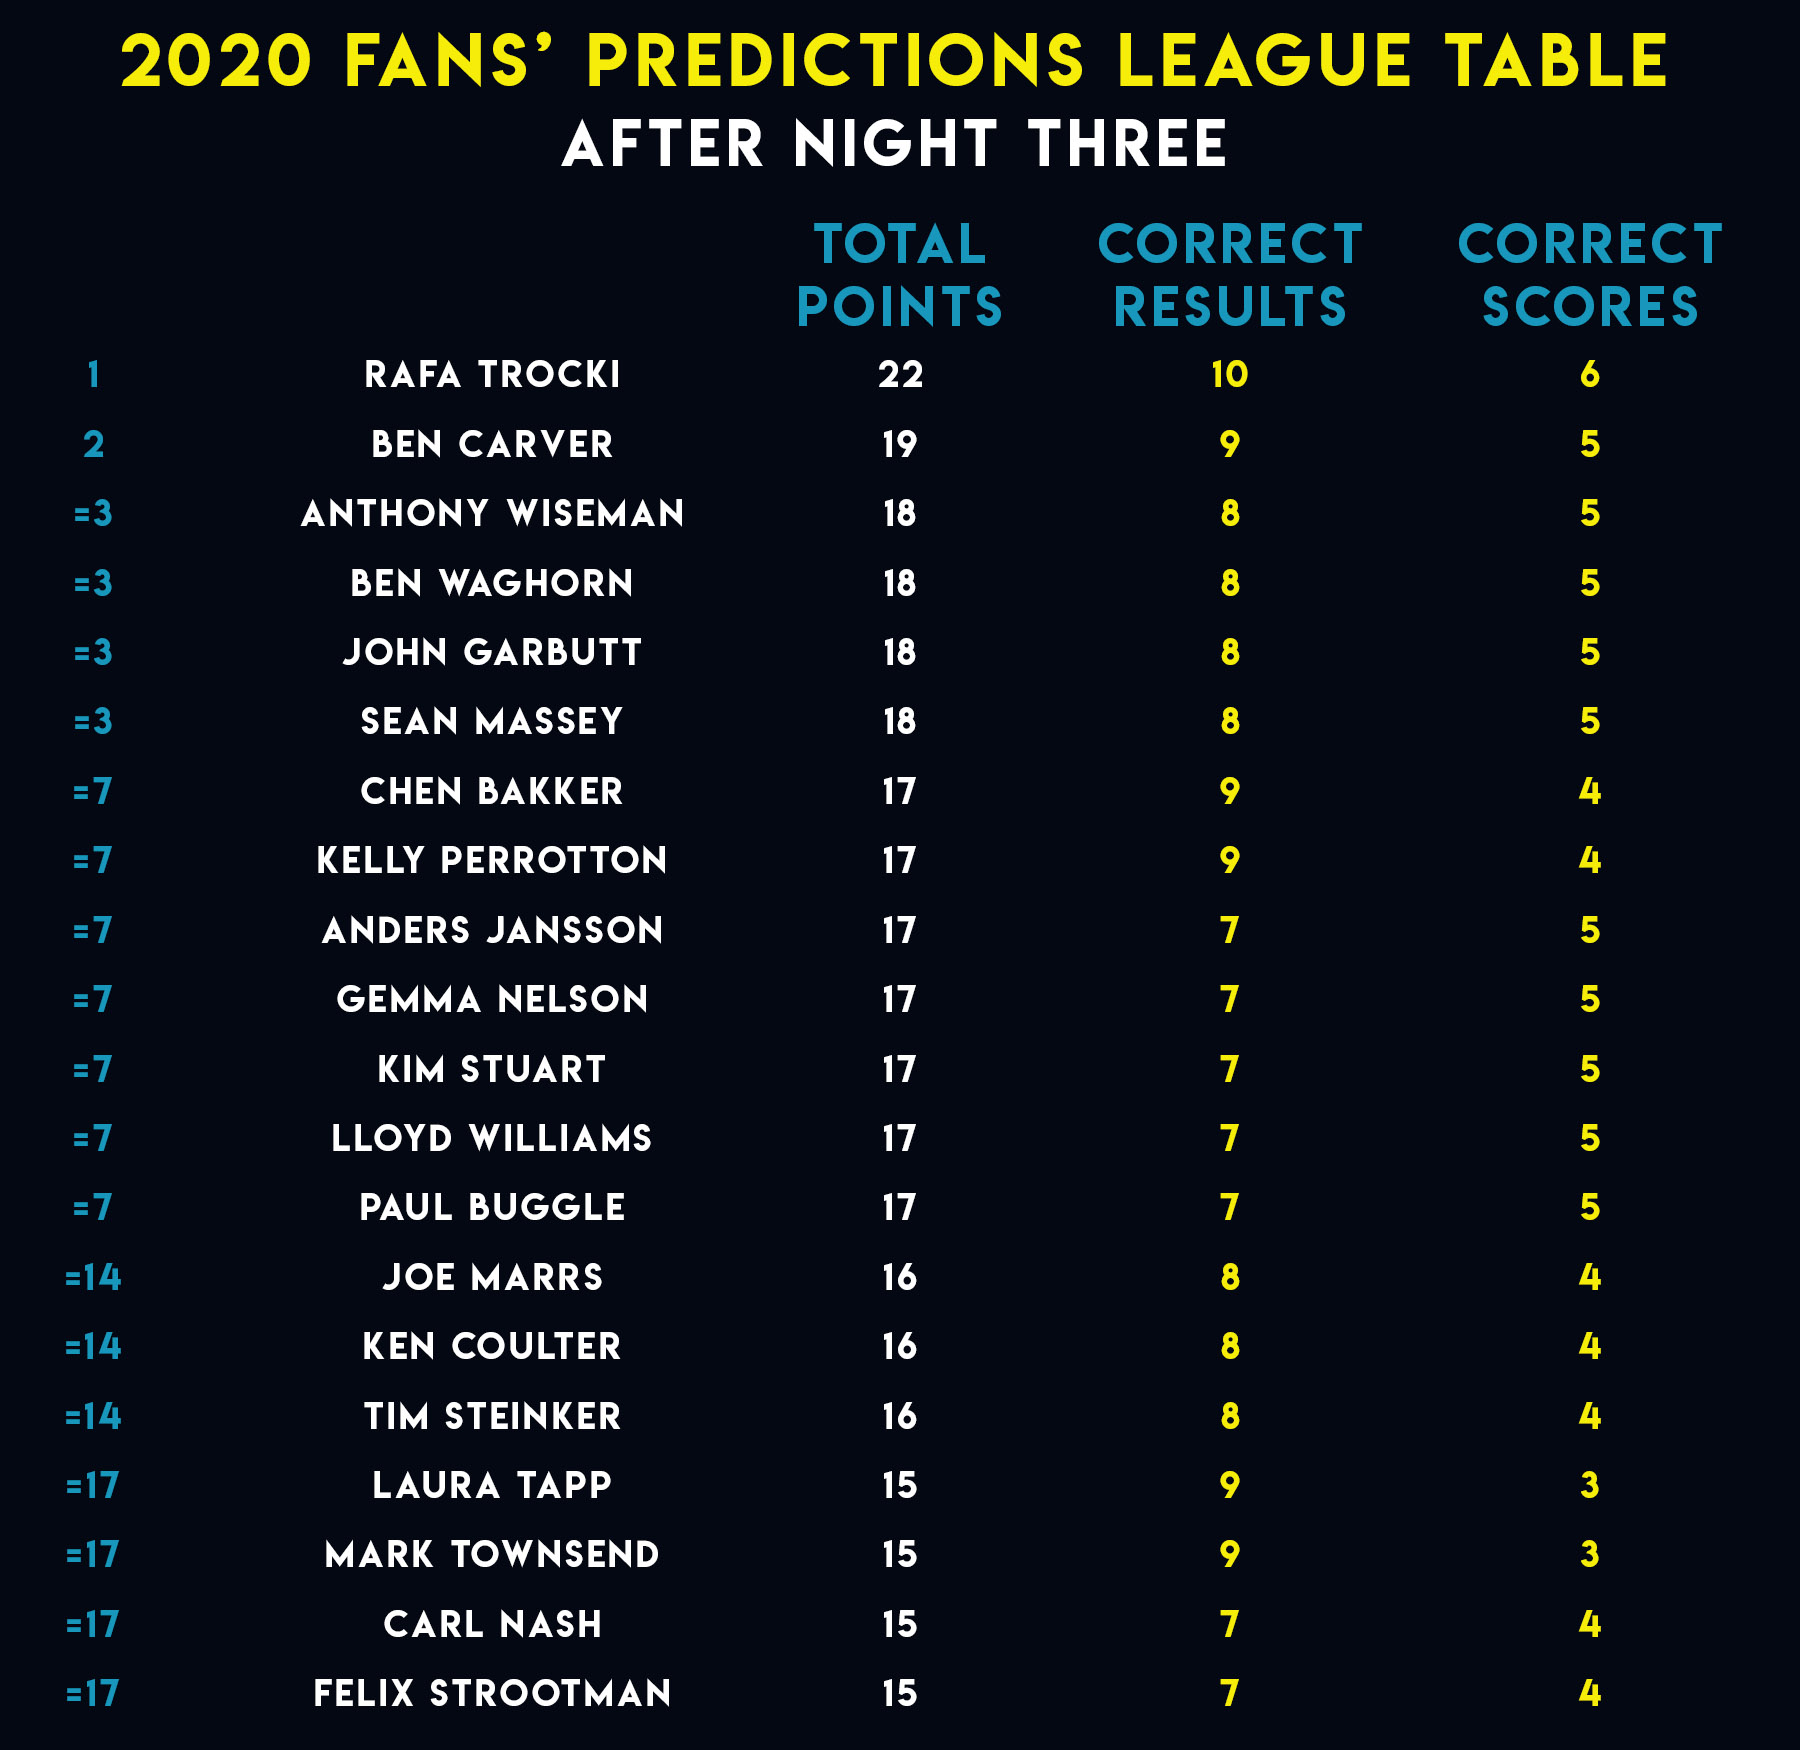 Fans' Predictions League overall standings